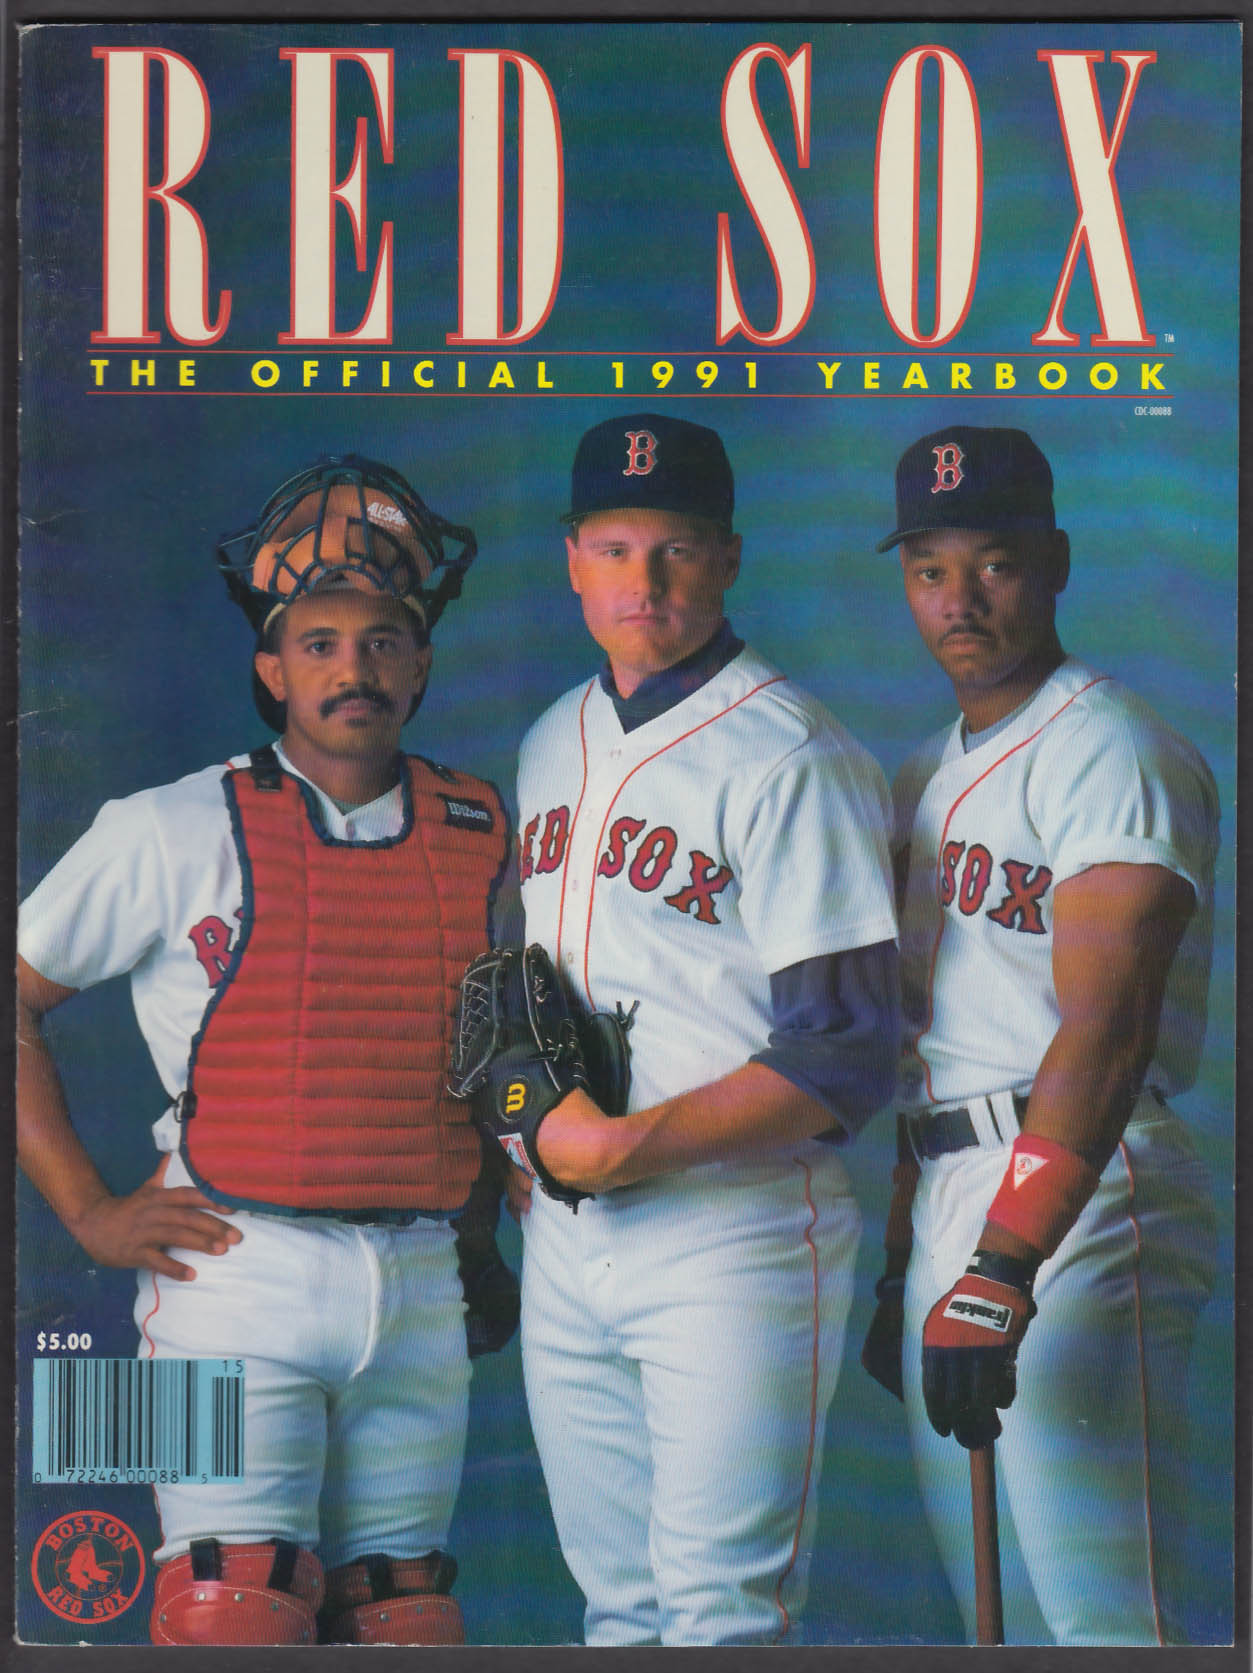 Boston Red Sox The Official 1991 Yearbook